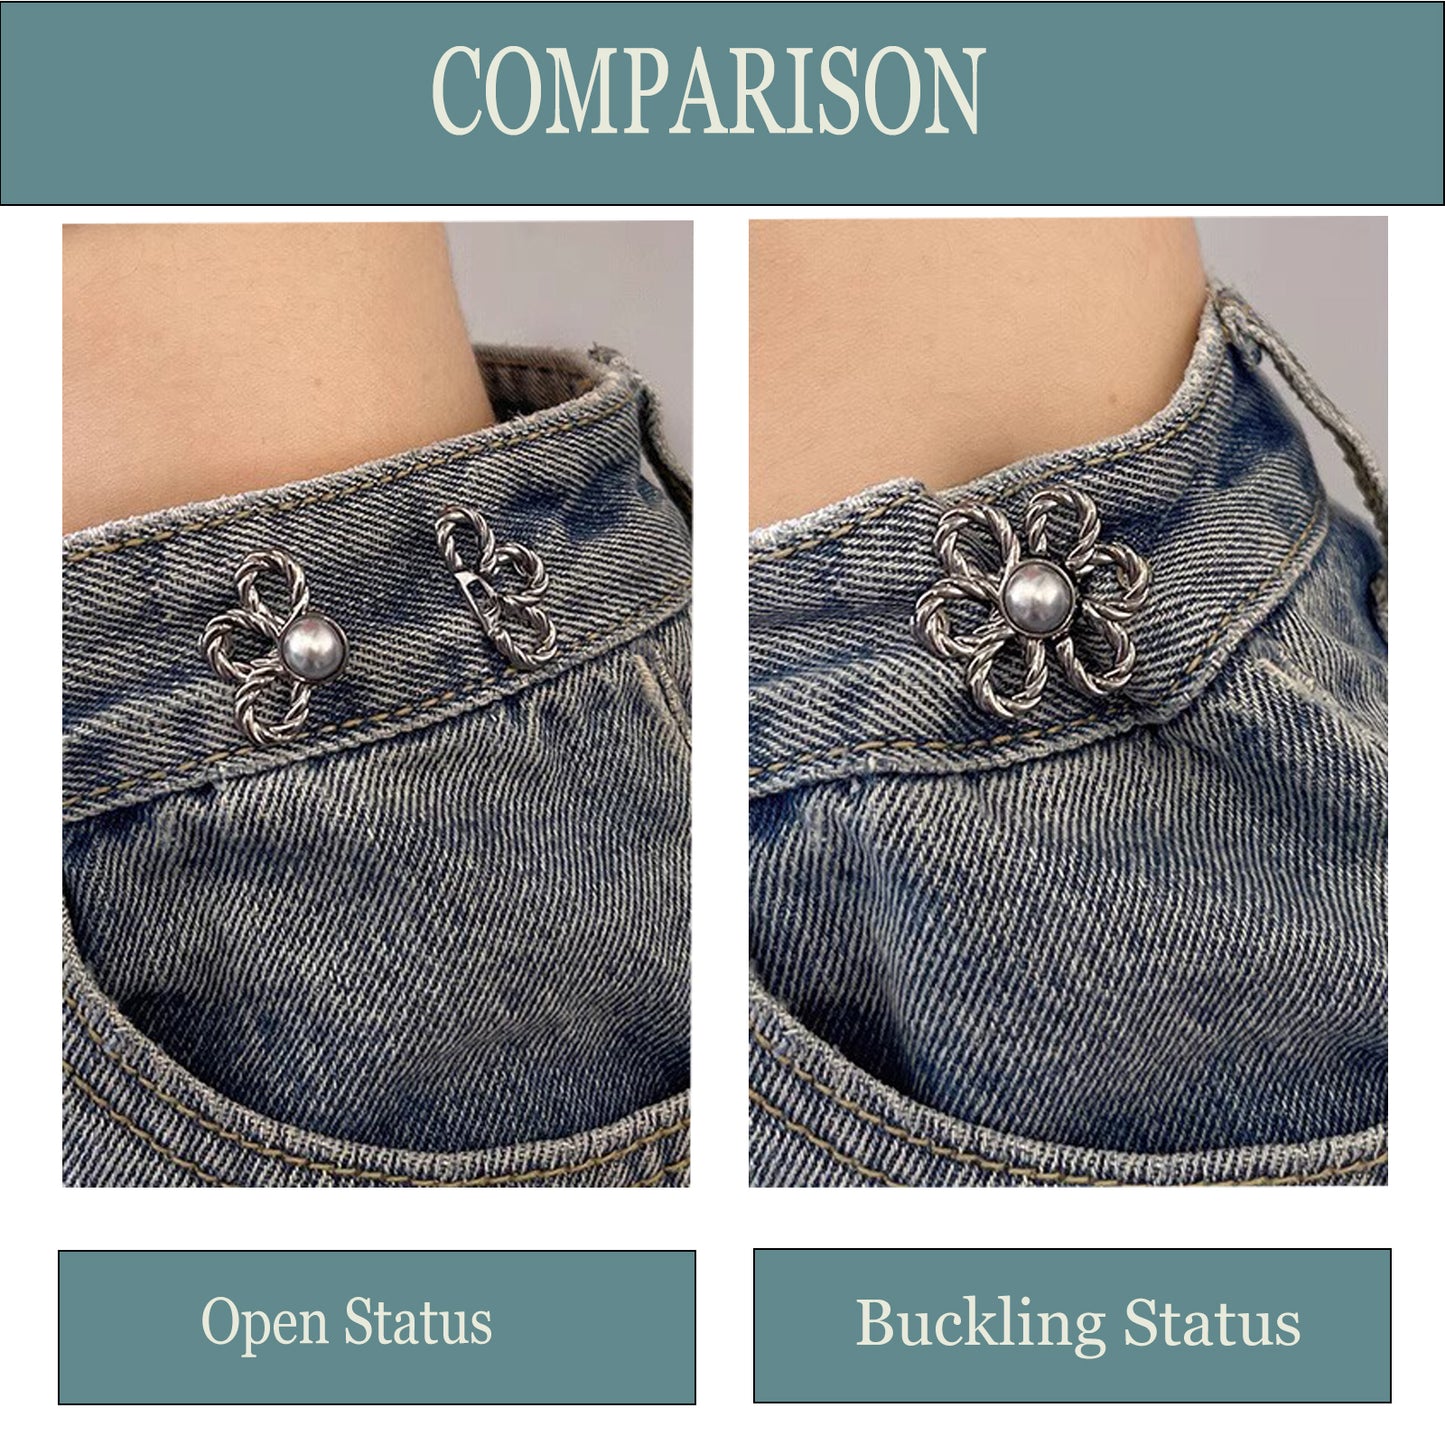 8 Sets Pant Waist Tightener, Detachable Flower Jean Buttons Pant Waist Tightener for Loose Jeans, Adjustable Waist Buckle Sets No Sew and No Tools Decorative Waist Buckles, Jean Buttons Pins for Loose Jeans, Pants, Skirts,